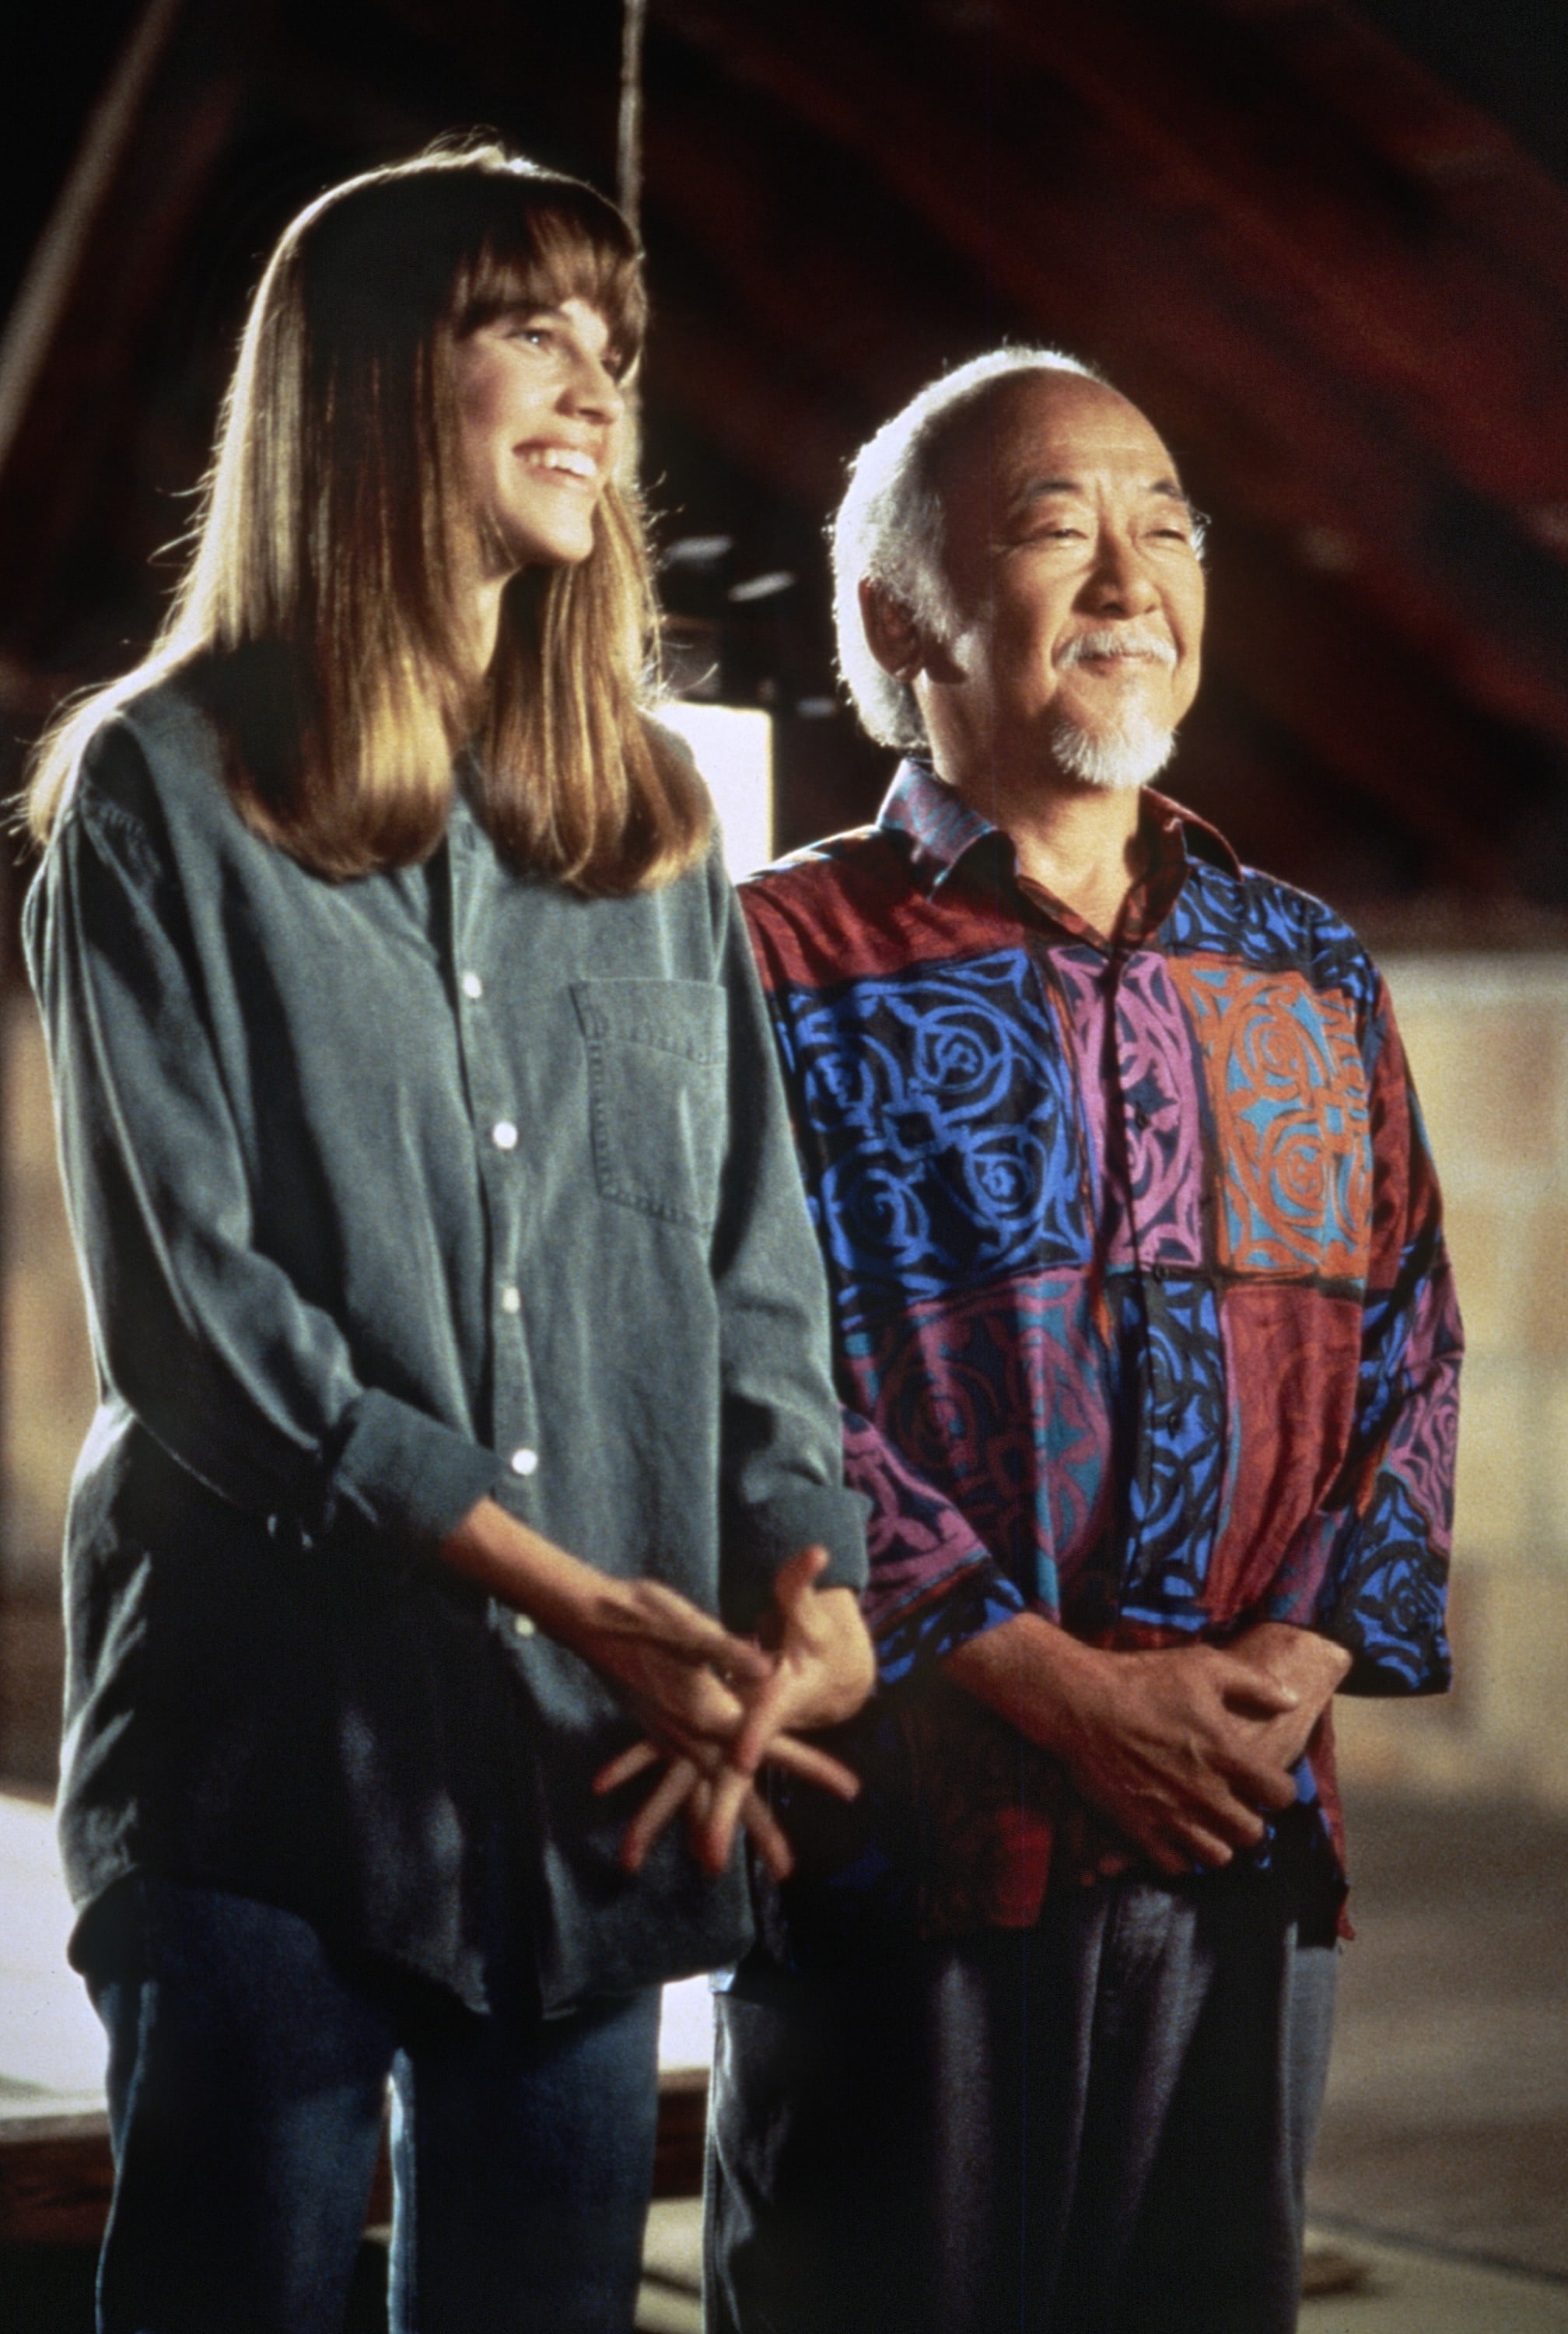 THE NEXT KARATE KID, from left: Hilary Swank, Pat Morita, 1994. Columbia Pictures / Courtesy Everett Collection